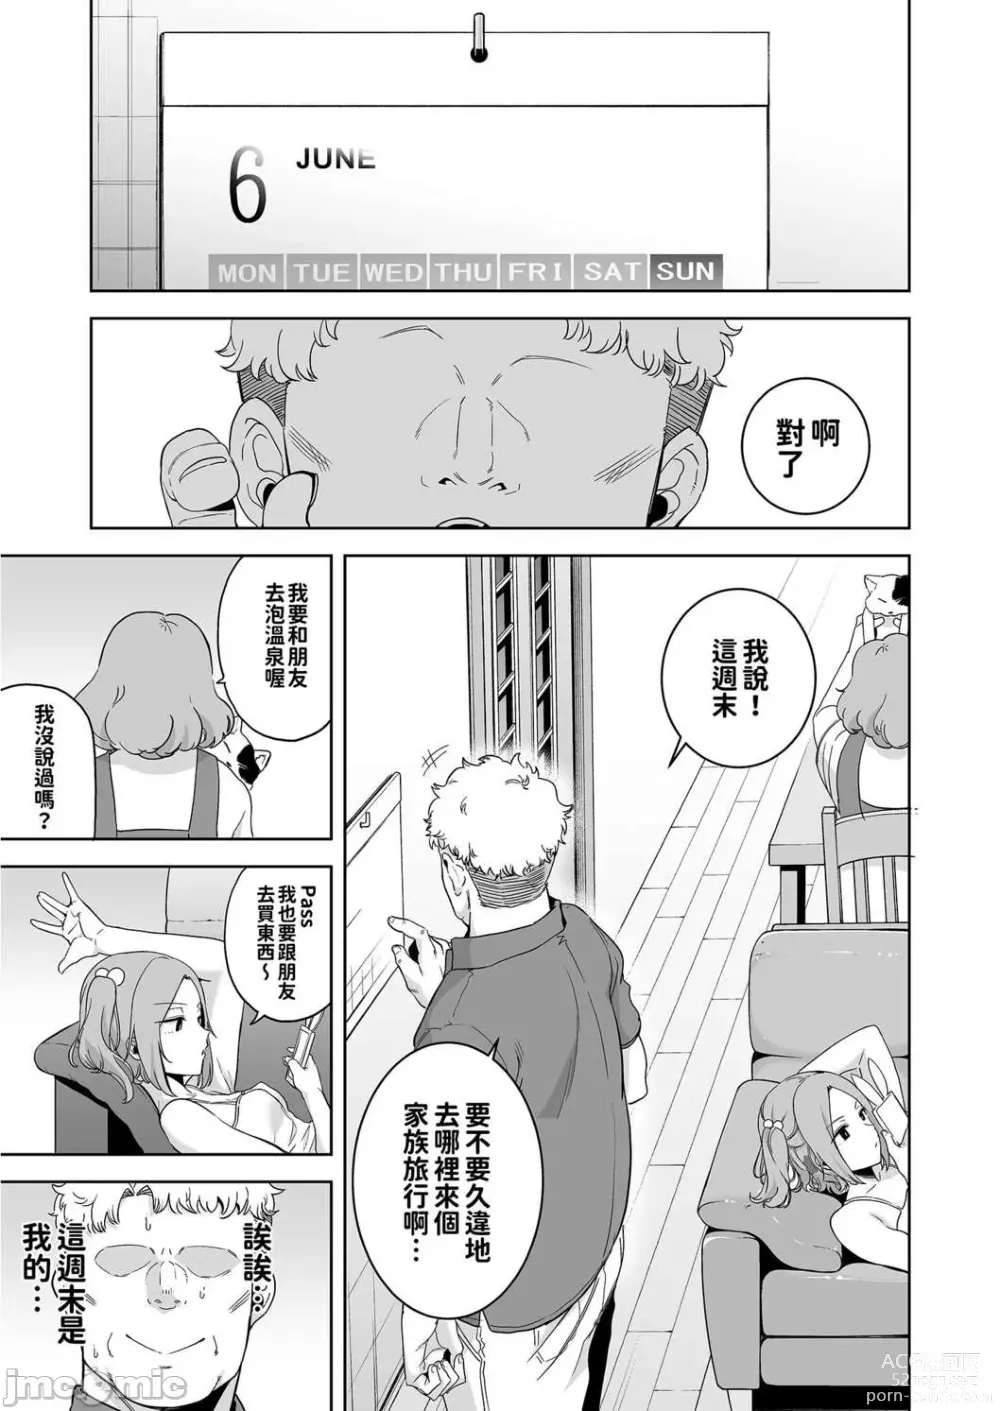 Page 3 of doujinshi 聖華女学院高等部公認竿おじさん 3